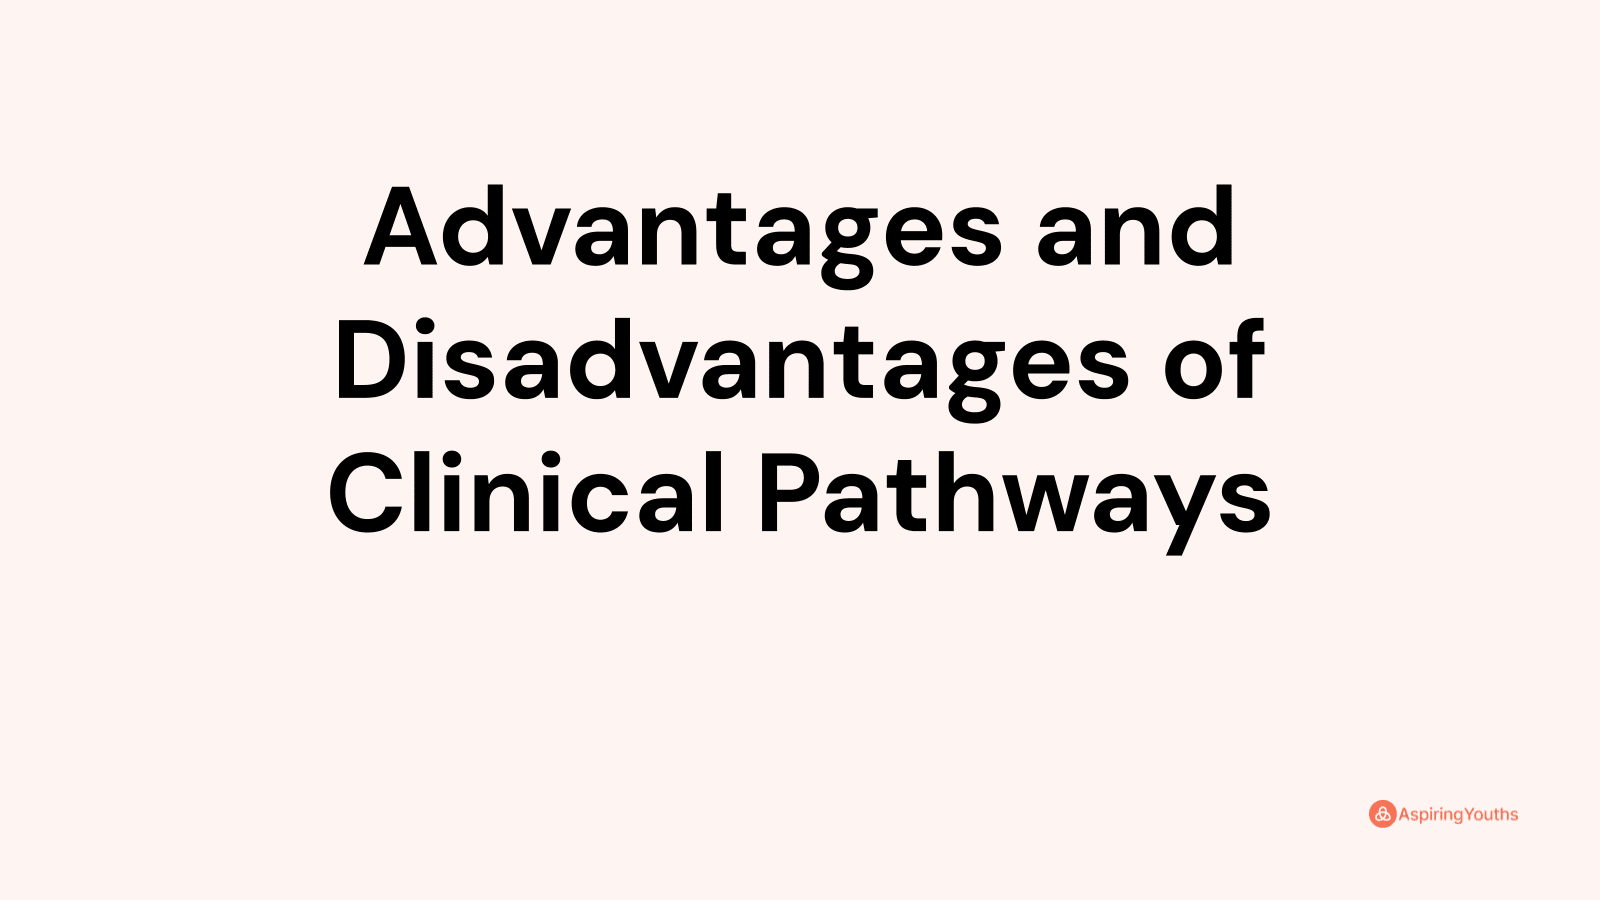 Advantages and disadvantages of Clinical Pathways